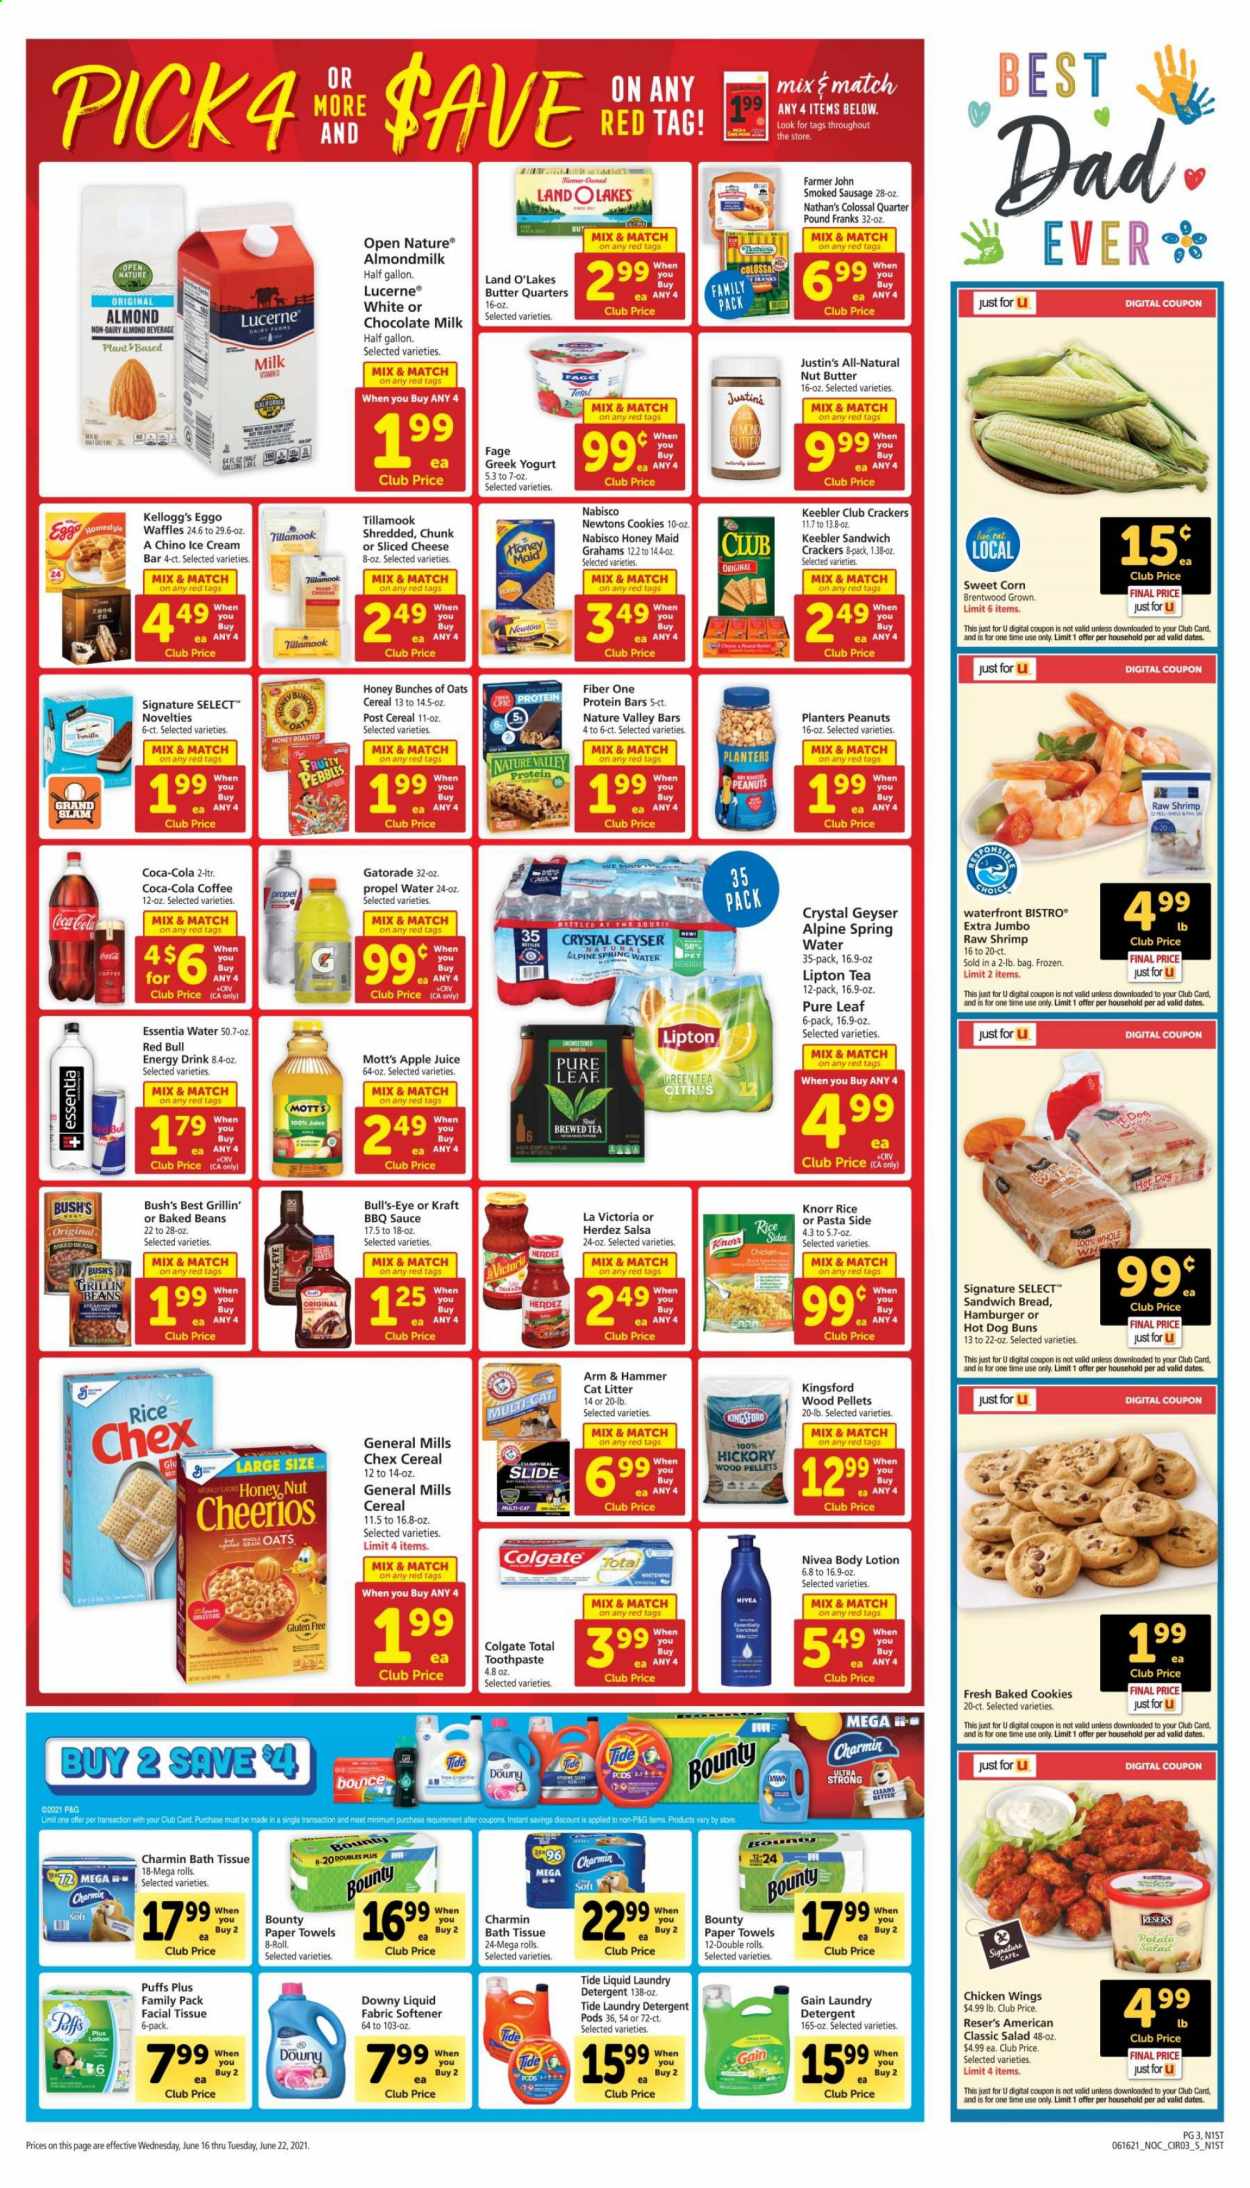 thumbnail - Safeway Flyer - 06/16/2021 - 06/22/2021 - Sales products - buns, puffs, waffles, corn, salad, sweet corn, Mott's, chicken wings, shrimps, Knorr, sauce, Kraft®, sausage, smoked sausage, cheese, greek yoghurt, yoghurt, almond milk, milk, ice cream, cookies, milk chocolate, Bounty, crackers, Kellogg's, Keebler, Chex Mix, ARM & HAMMER, baked beans, cereals, Cheerios, protein bar, Fruity Pebbles, Honey Maid, Nature Valley, Fiber One, BBQ sauce, salsa, nut butter, peanuts, Planters, apple juice, Coca-Cola, juice, energy drink, Lipton, Red Bull, Gatorade, spring water, green tea, tea, Pure Leaf, coffee, bath tissue, kitchen towels, paper towels, Charmin, detergent, Gain, Tide, fabric softener, laundry detergent, Downy Laundry, Colgate, toothpaste, Nivea, gallon. Page 3.